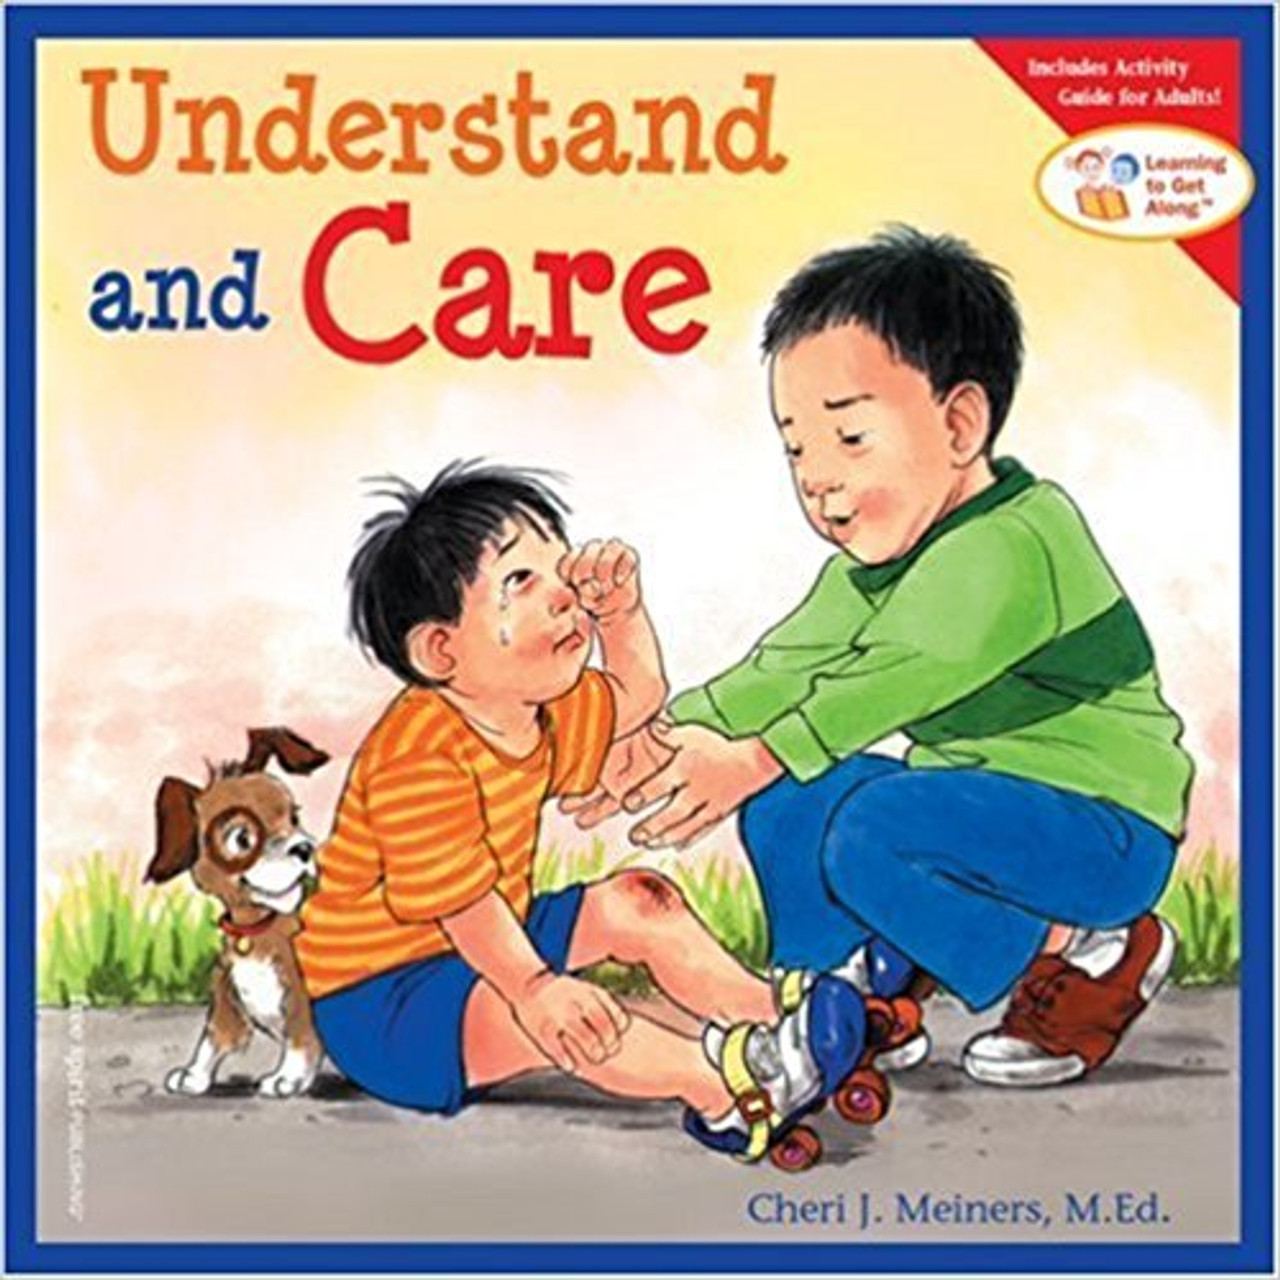 Understand and Care by Cheri J. Meiners